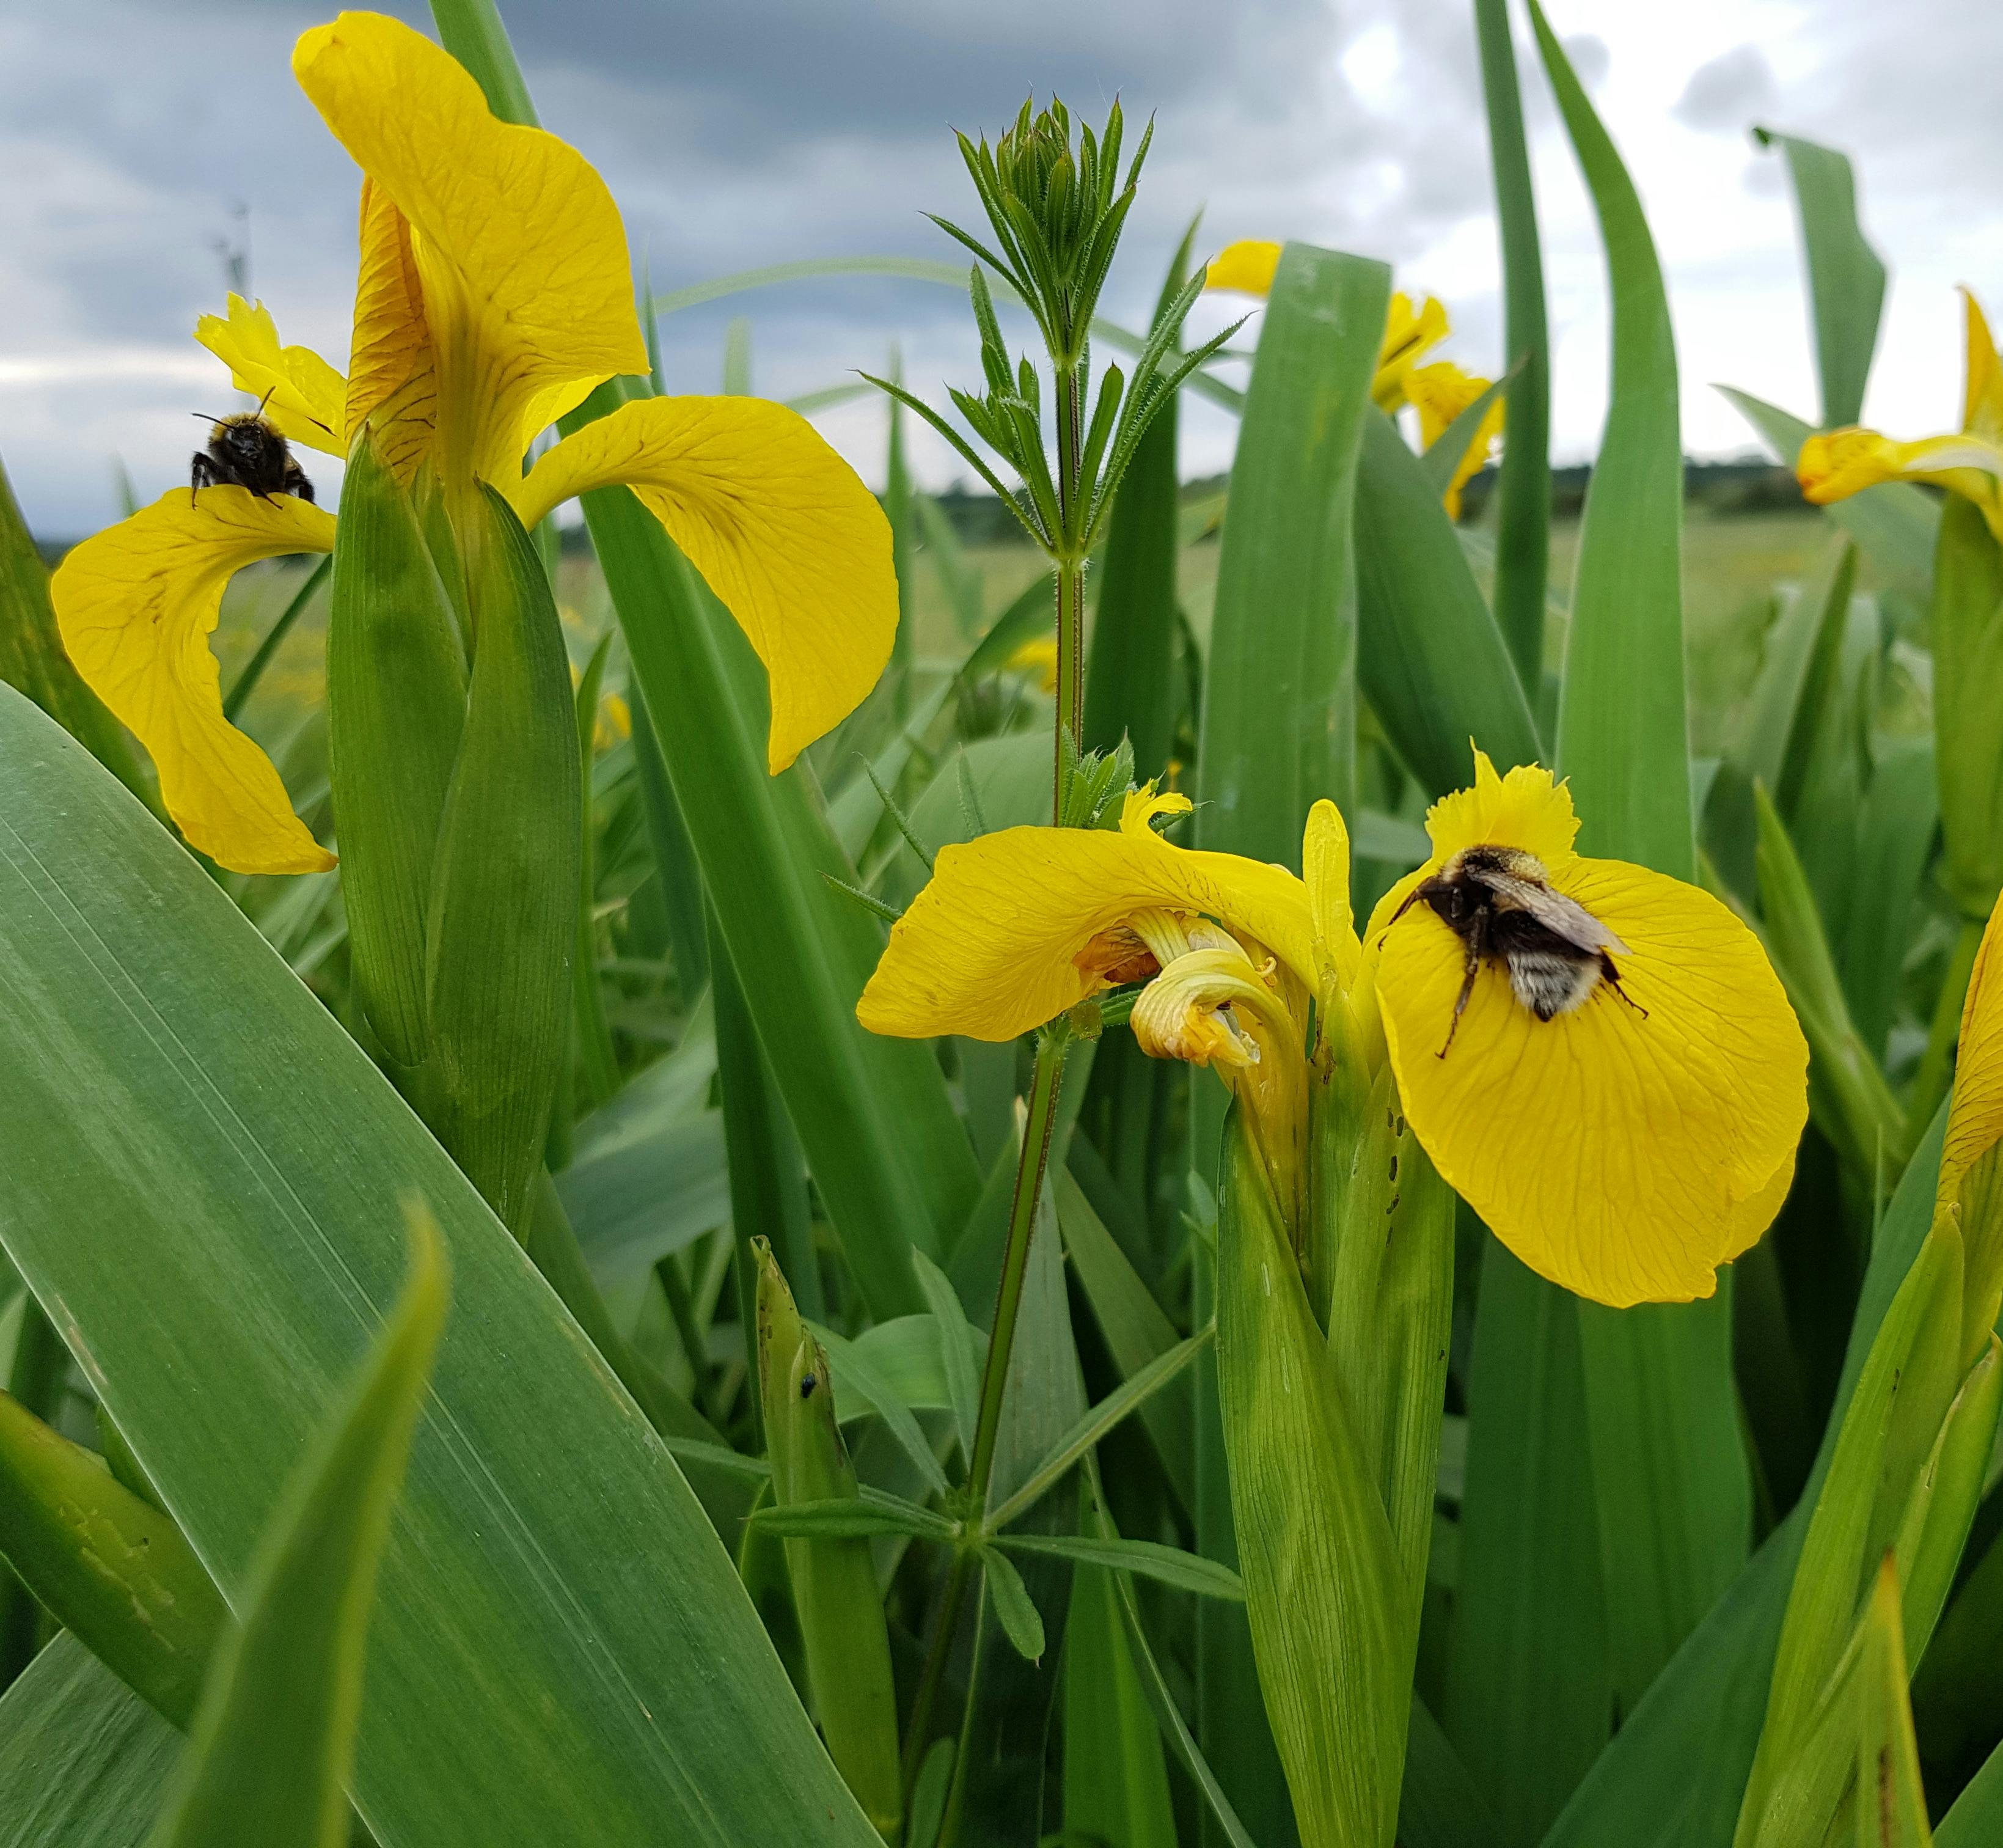 Bumble bees on yellow Iris flowers